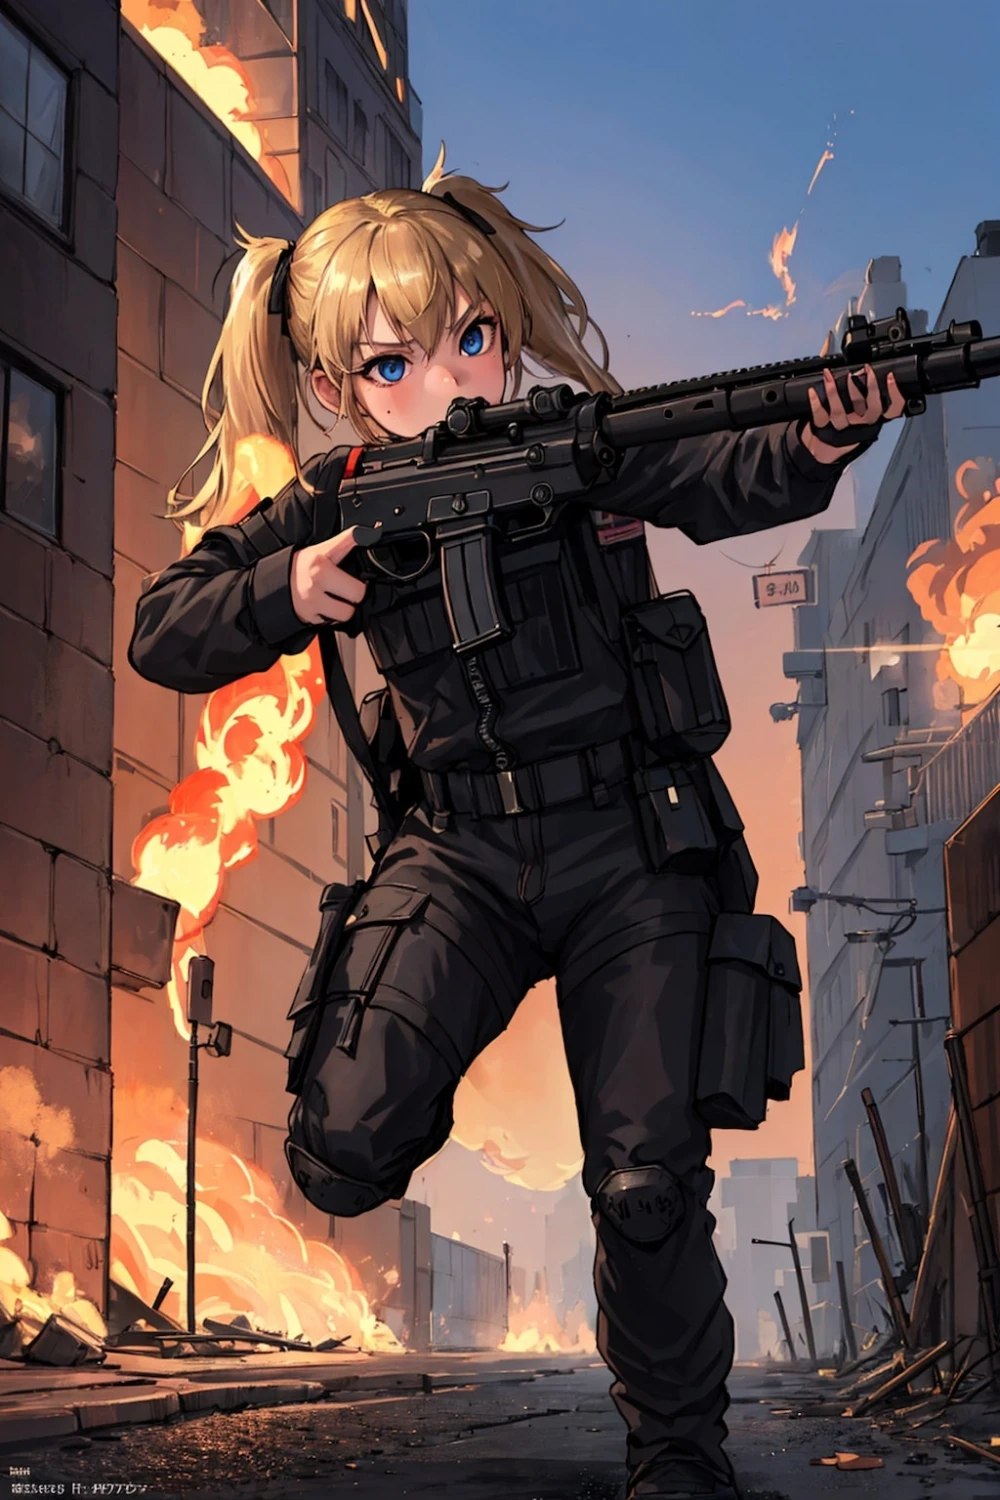 gun-anime-style-all-ages-27